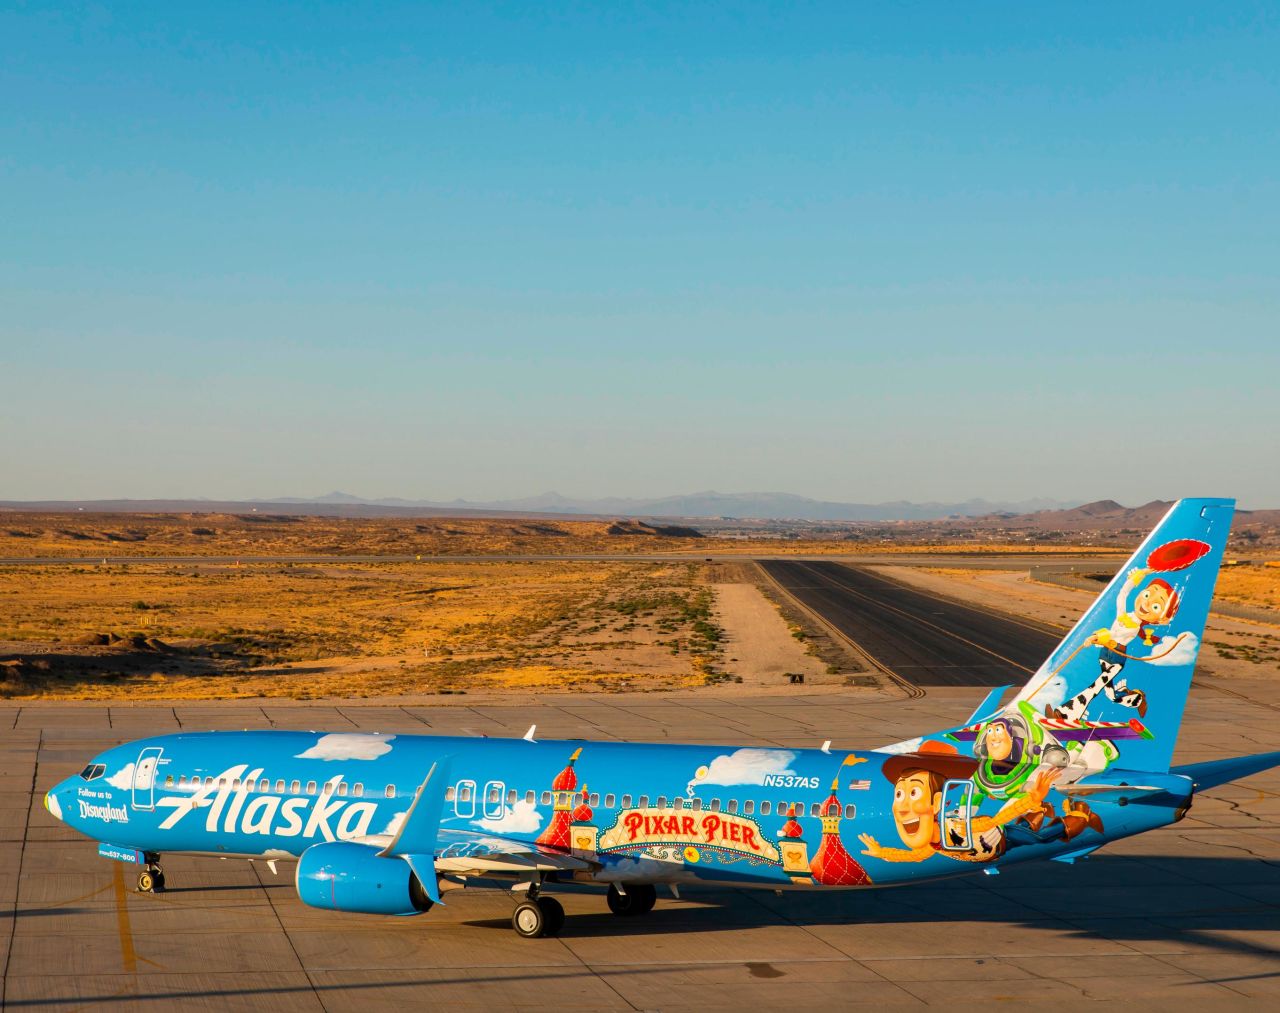 <strong>'To infinity and beyond':</strong> The Alaska Airlines Boeing 737 with a Disney-Pixar "Toy Story" livery took IAC a whole 21 days to complete.